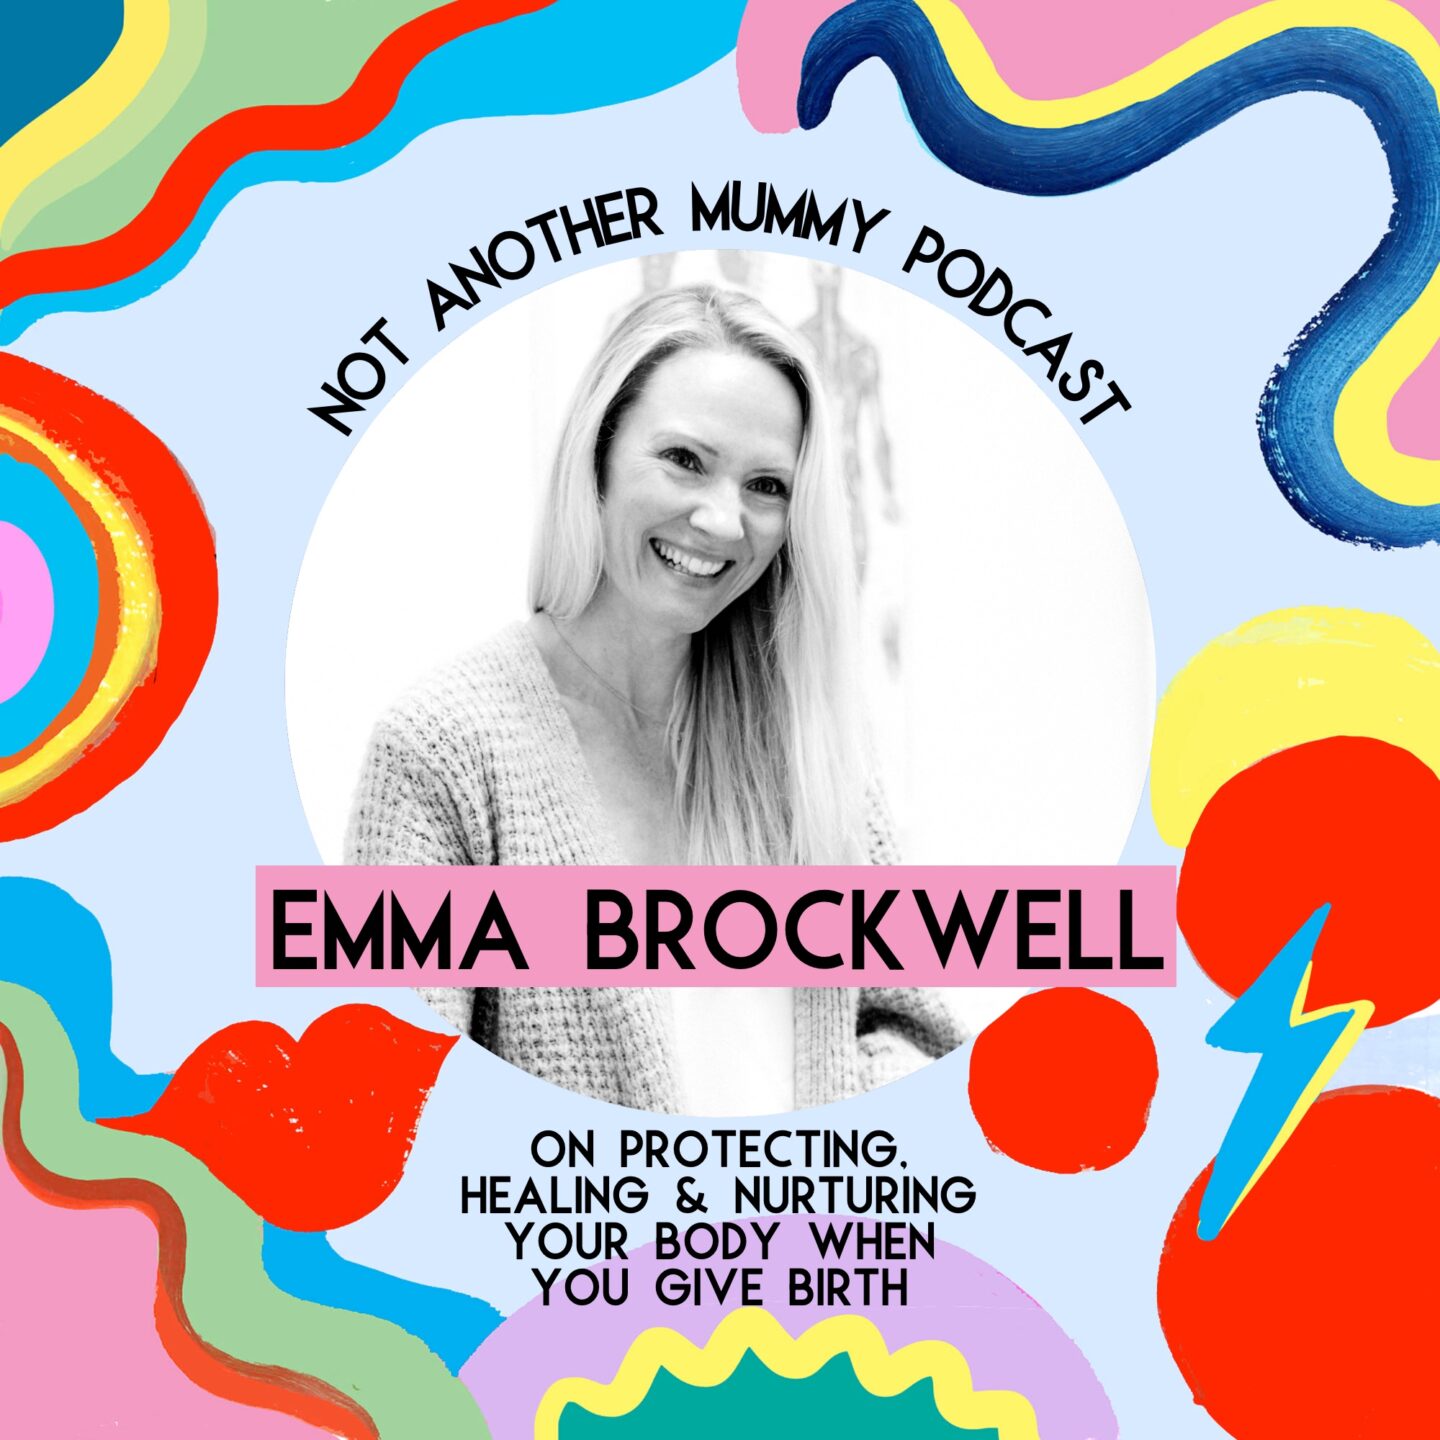 Podcast: Emma Brockwell (Physio Mum UK) On Protecting, Healing and Nurturing Your Body When You Give Birth